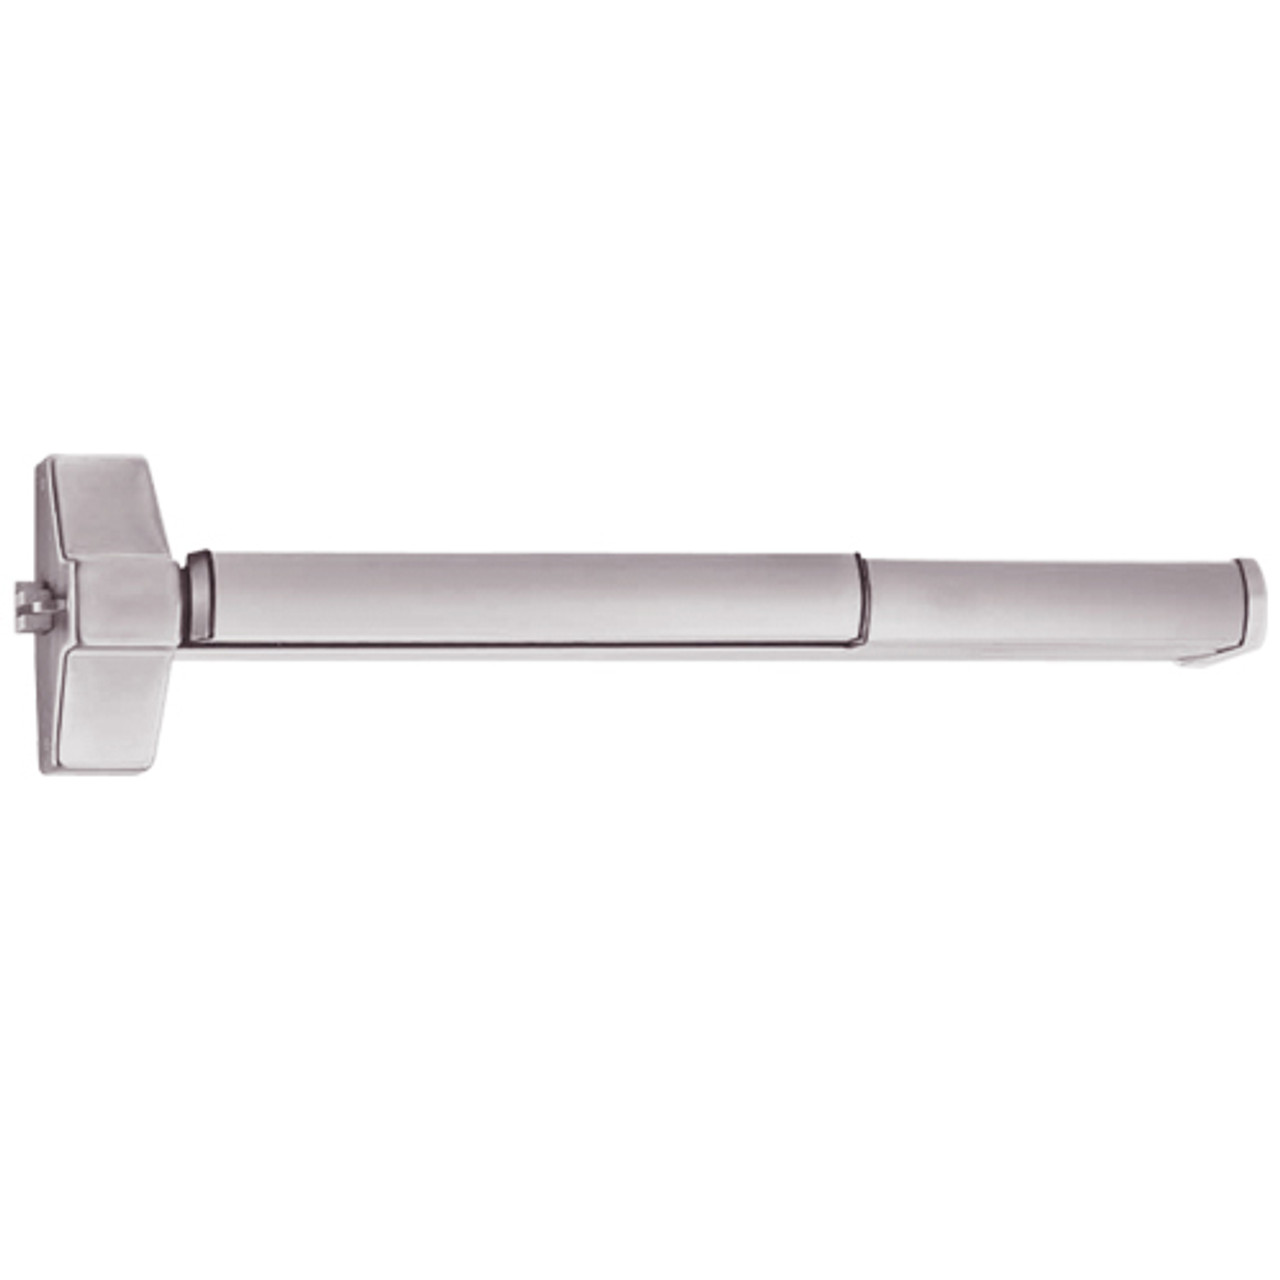 ED5200SA-630-M61 Corbin ED5200 Series Fire Rated Exit Device with Exit Alarm Device in Satin Stainless Steel Finish